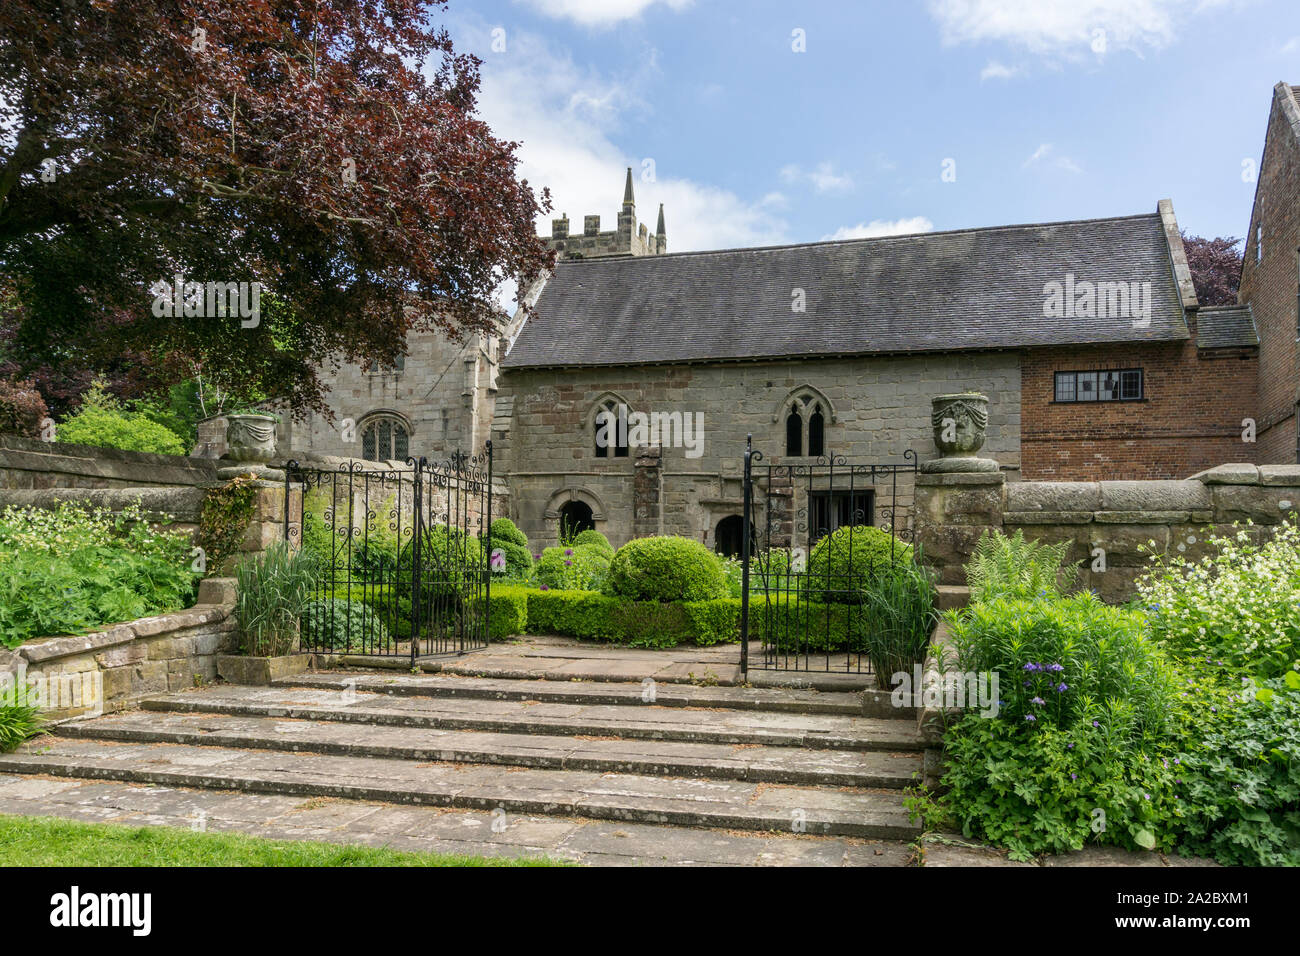 Upper Hall House, a 13th century building attaching to Norbury Manor, Norbury, Derbyshire, UK; viewed from a public footpath. Stock Photo